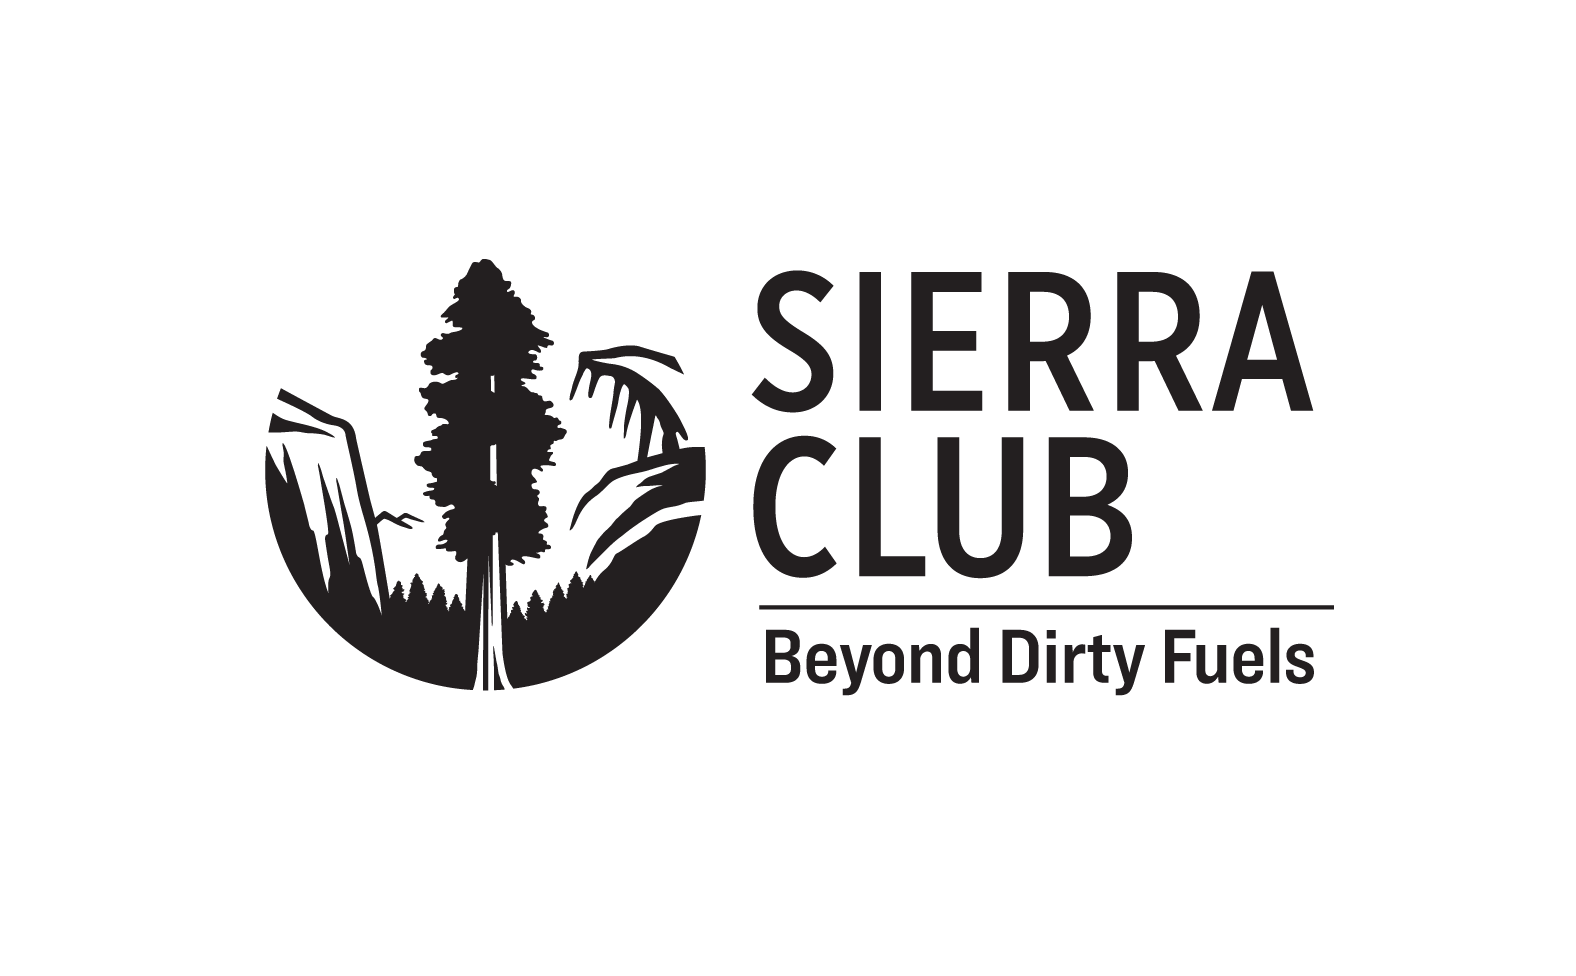 Beyond Dirty Fuels